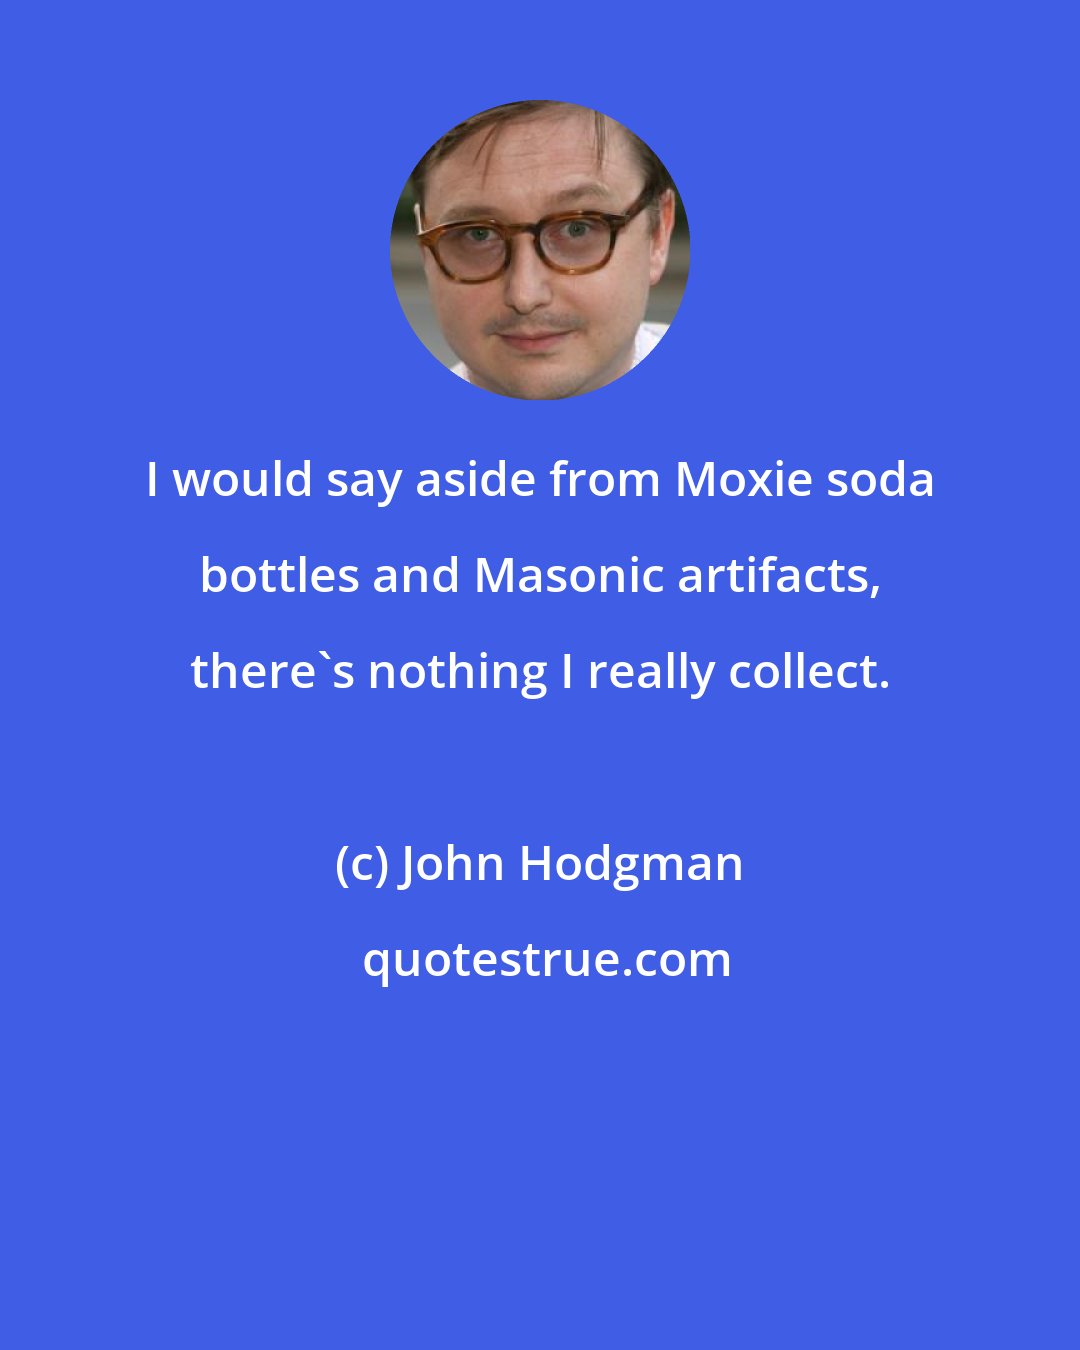 John Hodgman: I would say aside from Moxie soda bottles and Masonic artifacts, there's nothing I really collect.